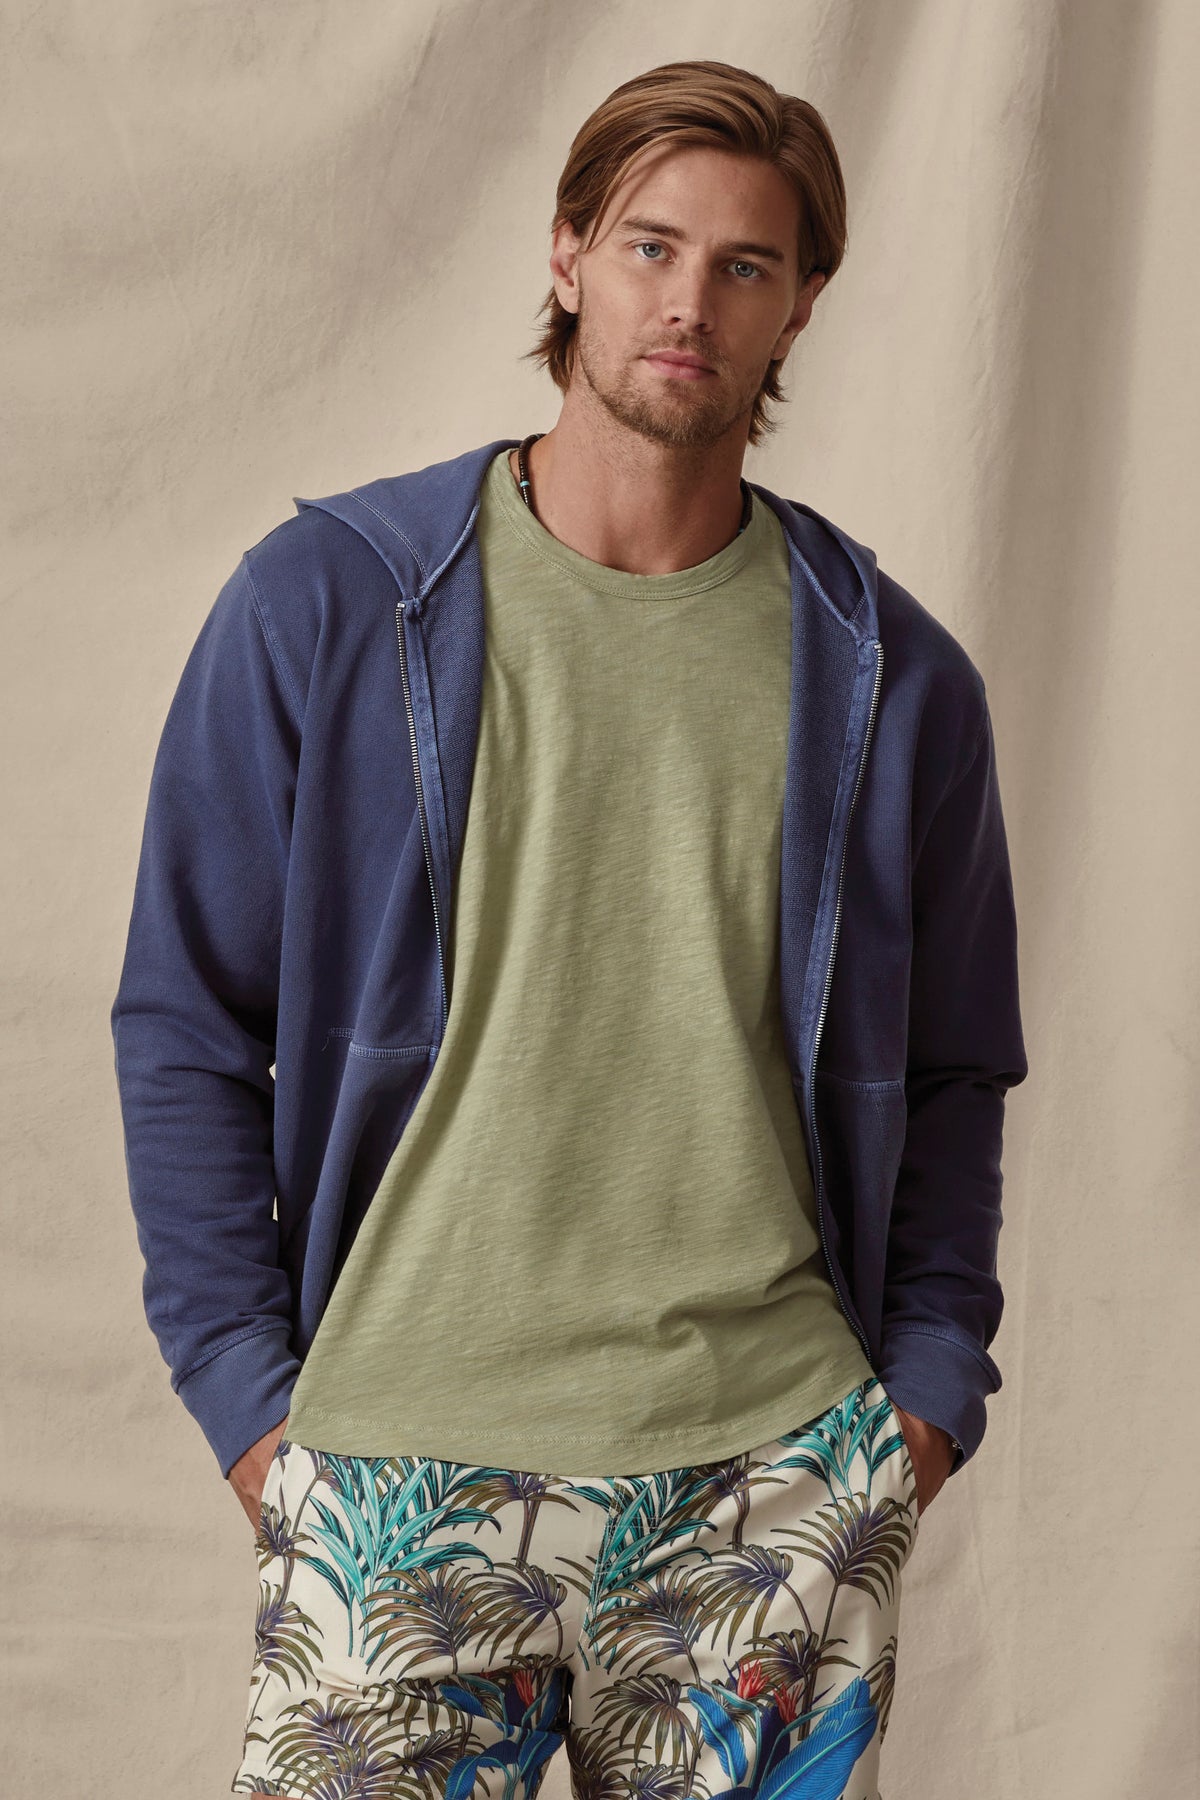 A man with shoulder-length hair wearing a Velvet by Graham & Spencer Vincent Hoodie, green t-shirt, and tropical print pants, standing against a beige backdrop.-36732538290369